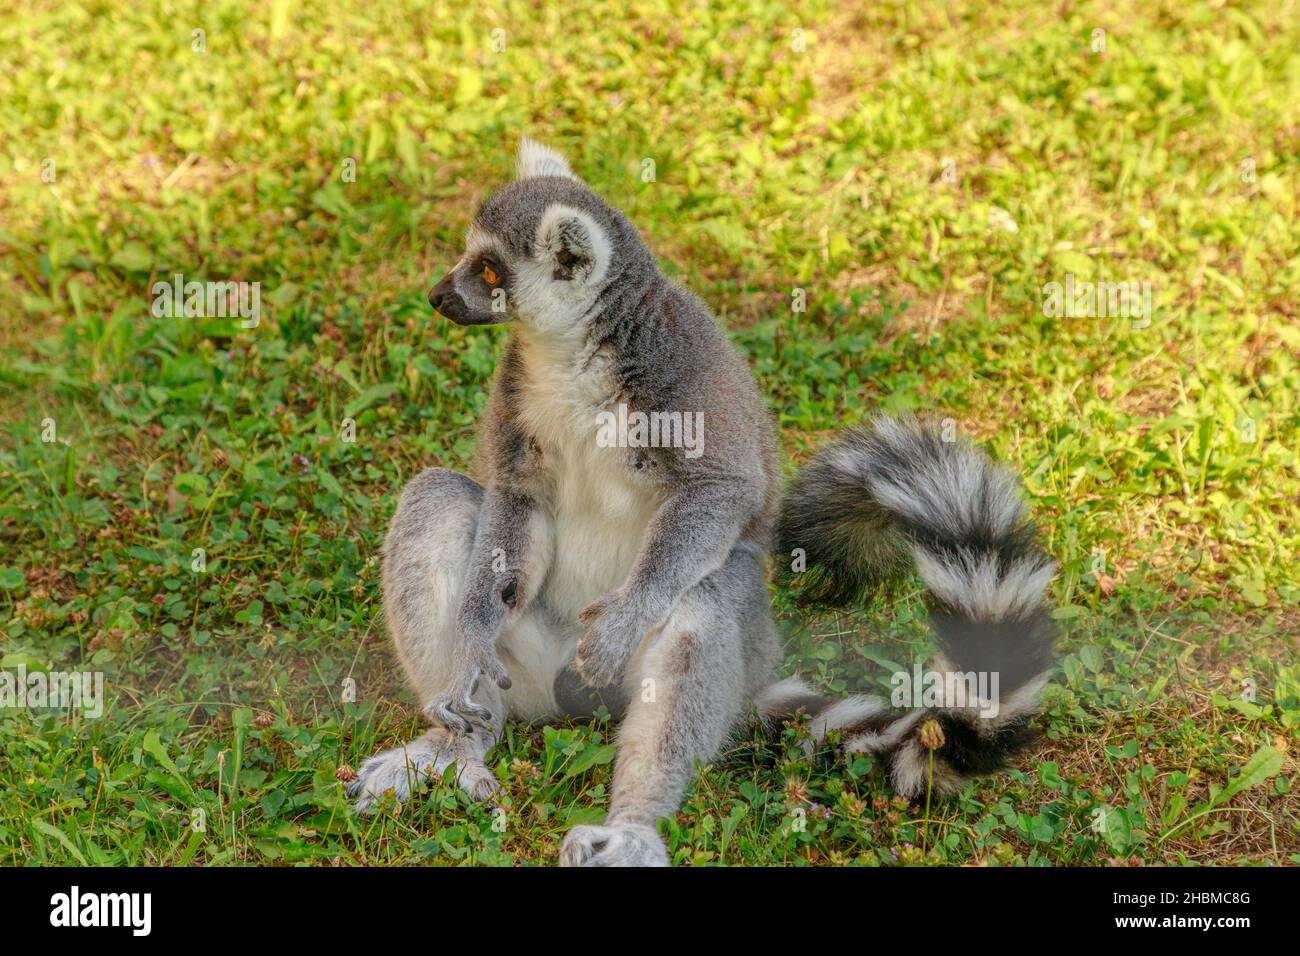 Lemur of Madagascar ring-tailed, sitting on the grass. Lemur catta species from Madagascar. Stock Photo